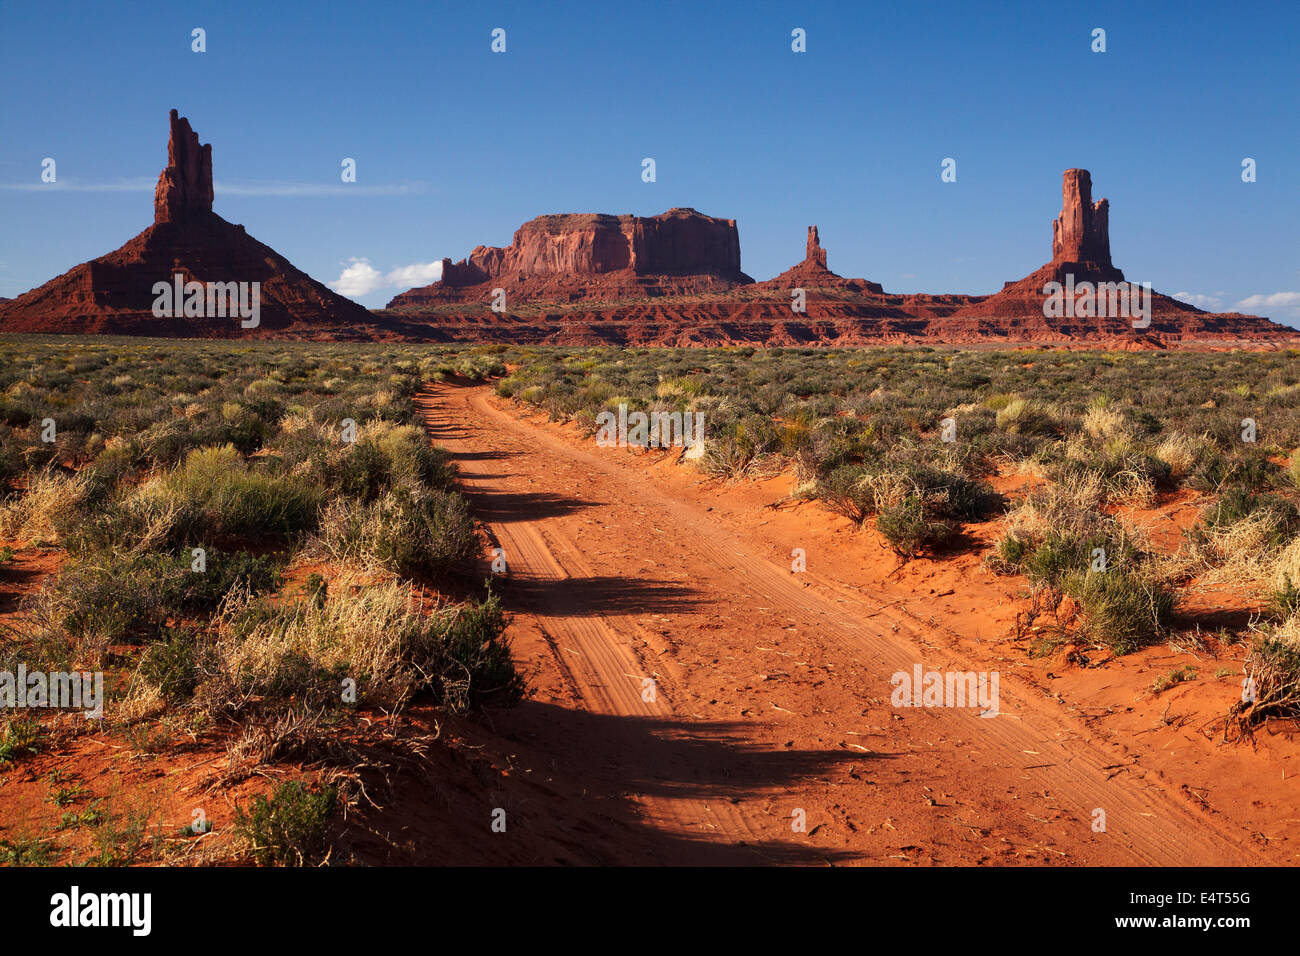 Big Indian, Brigham’s Tomb, King on his throne, and The Castle rock formations, and sandy track, Monument Valley, Navajo Nation, Stock Photo